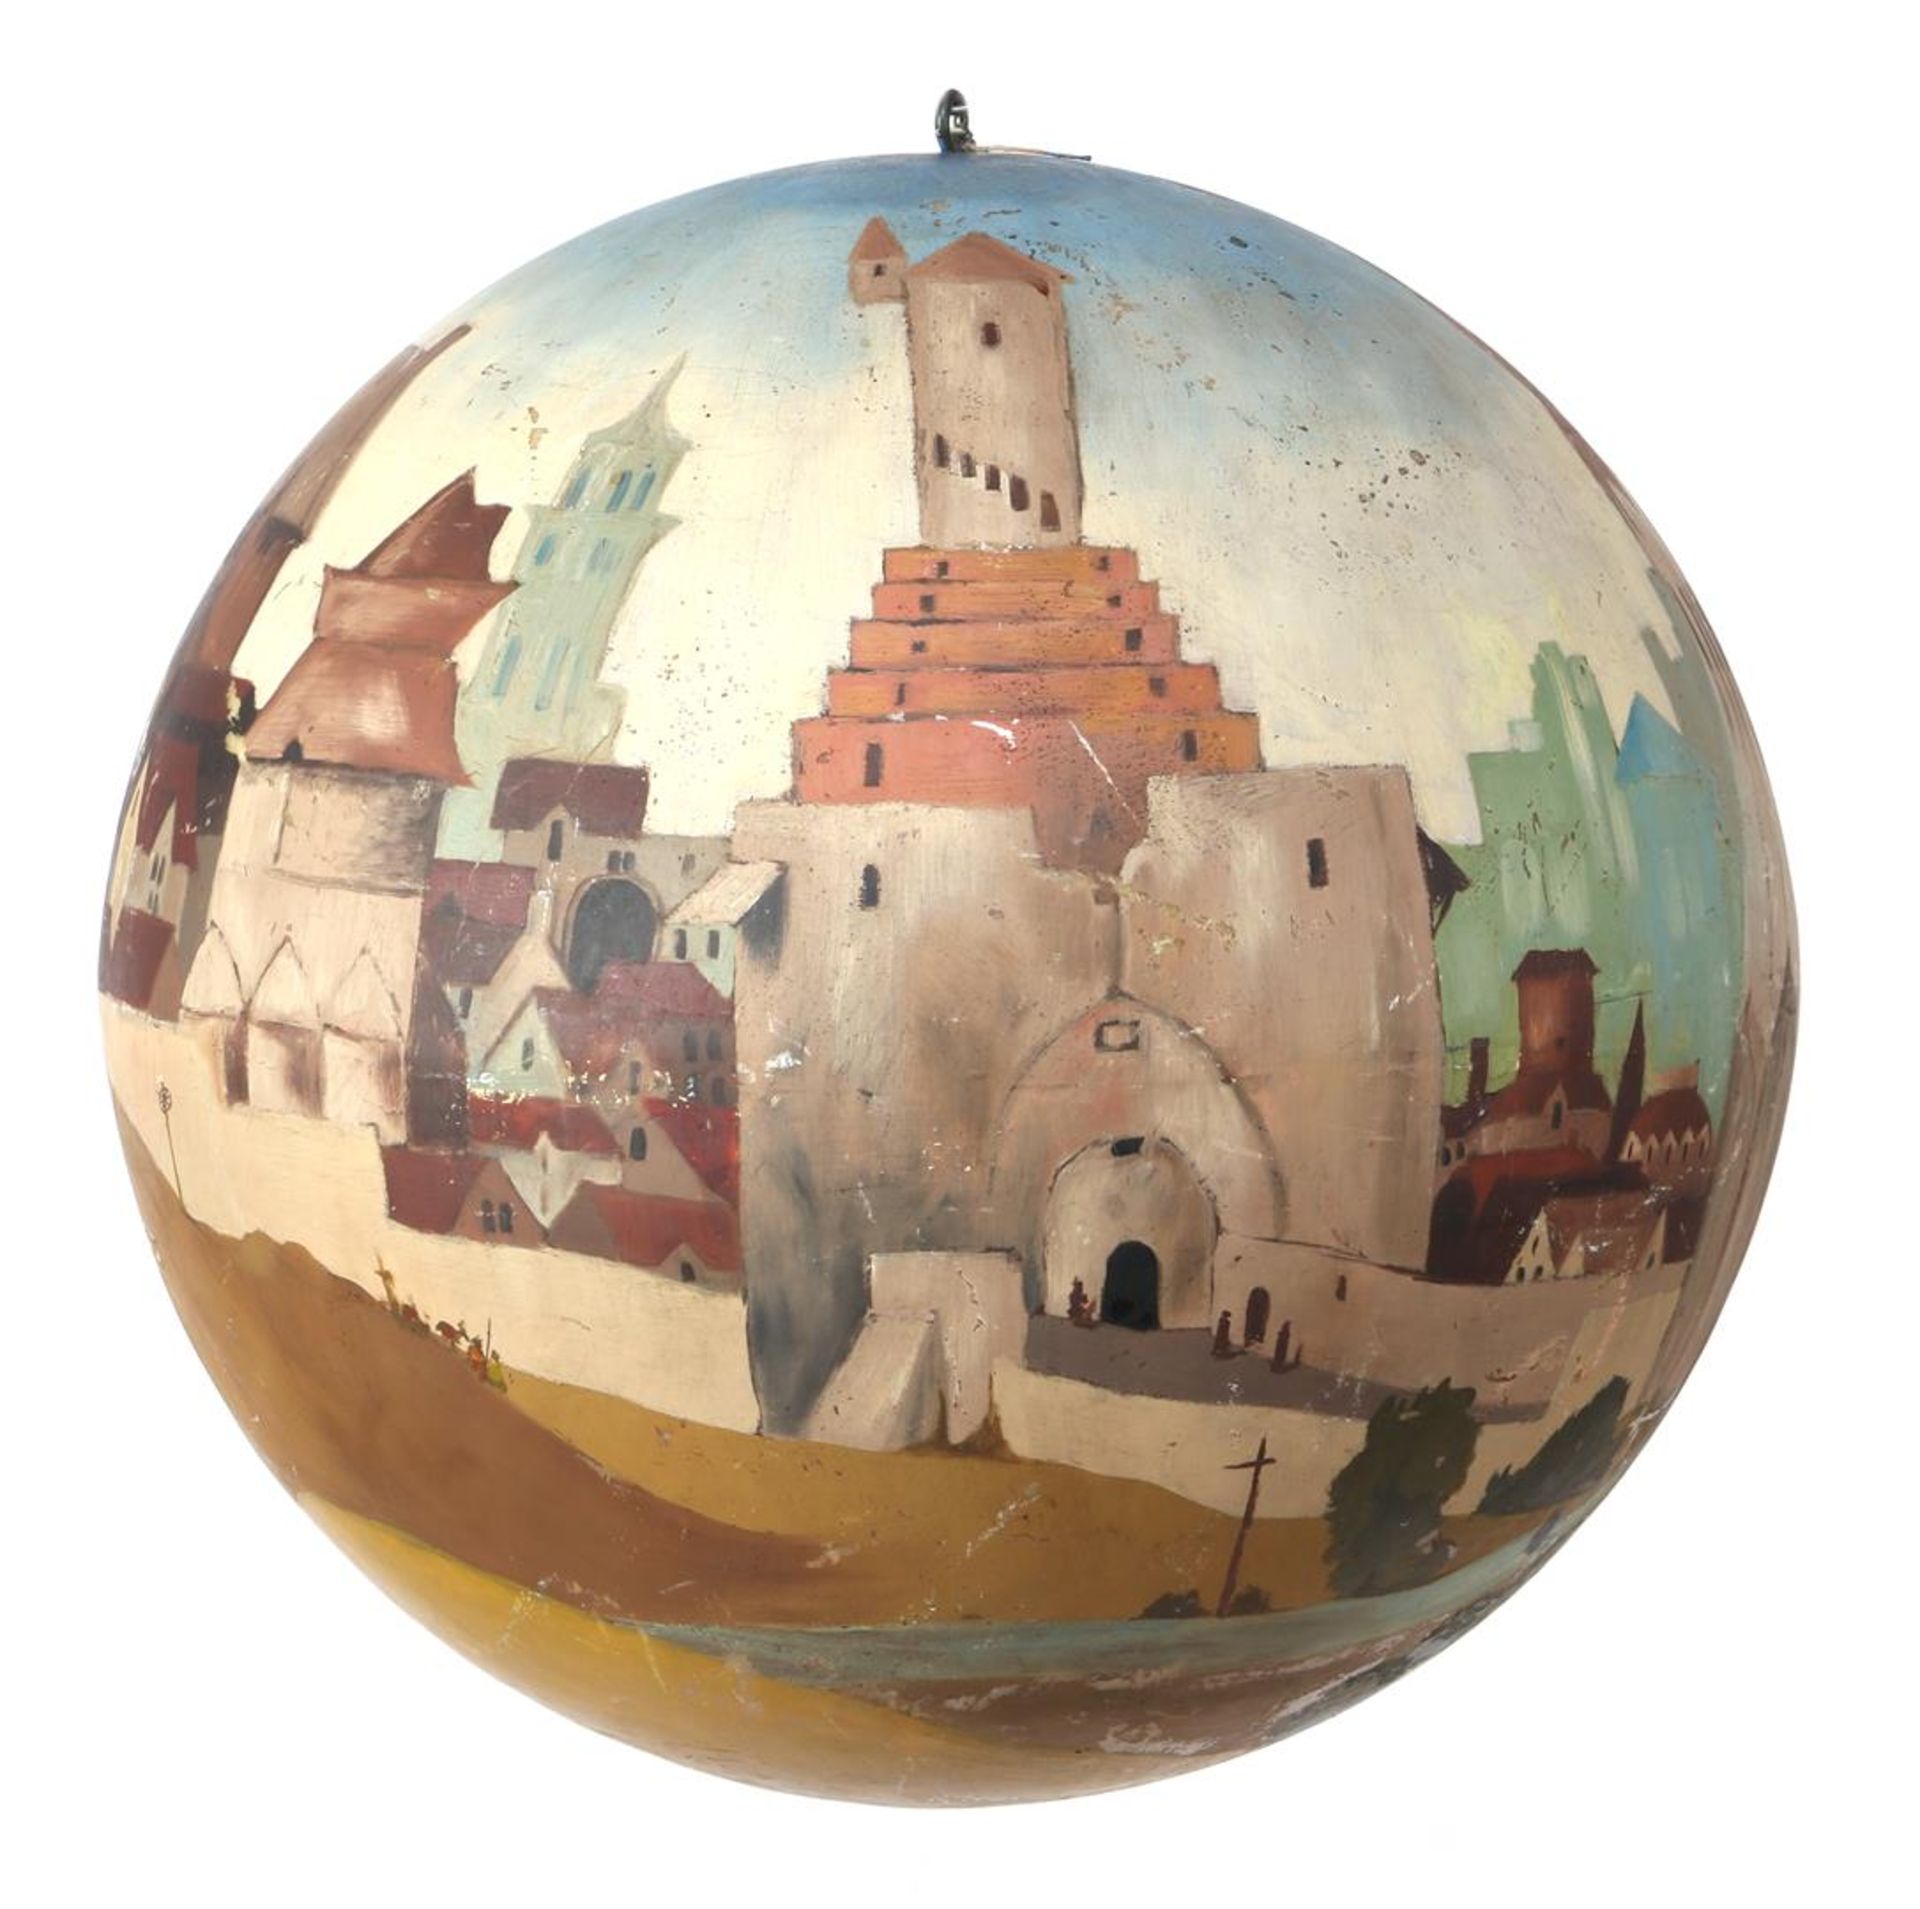 Hand-painted sphere - Image 3 of 3